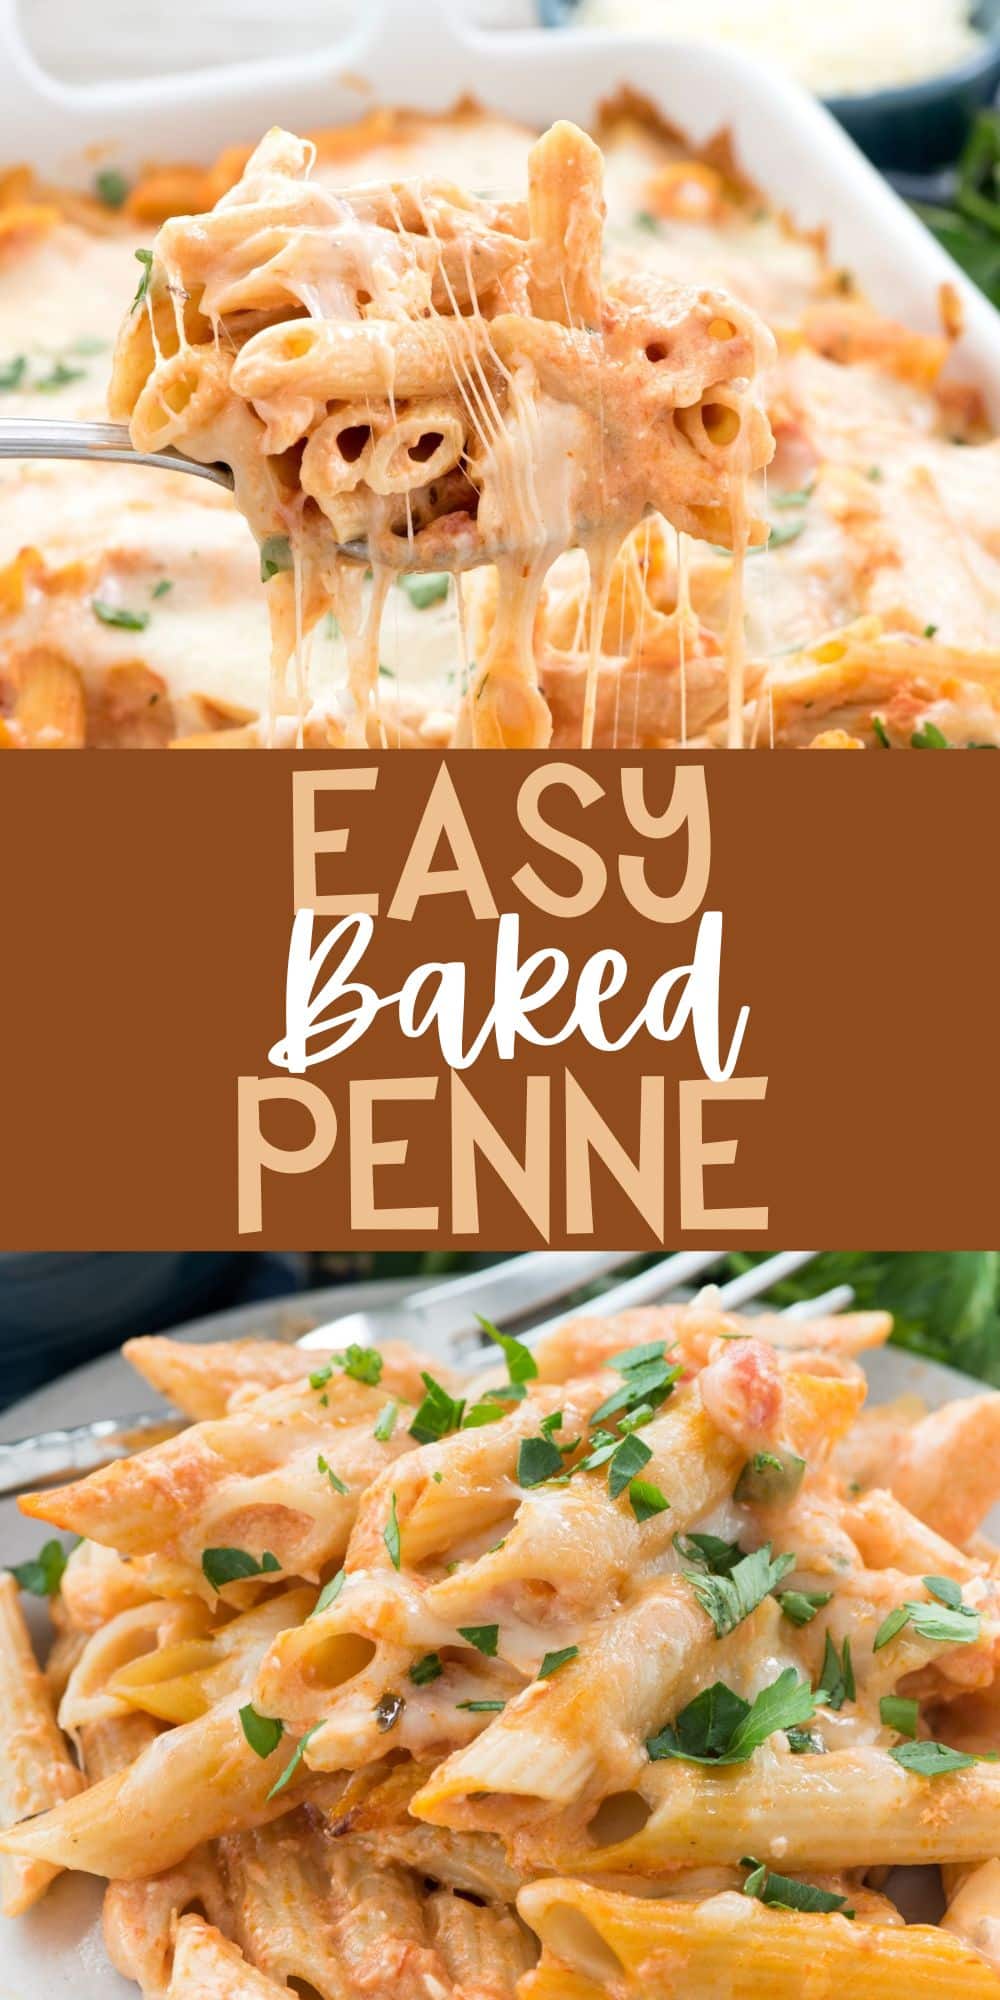 two photos of baked penne being scooped out of a teal pan with a silver spoon with words on the image.